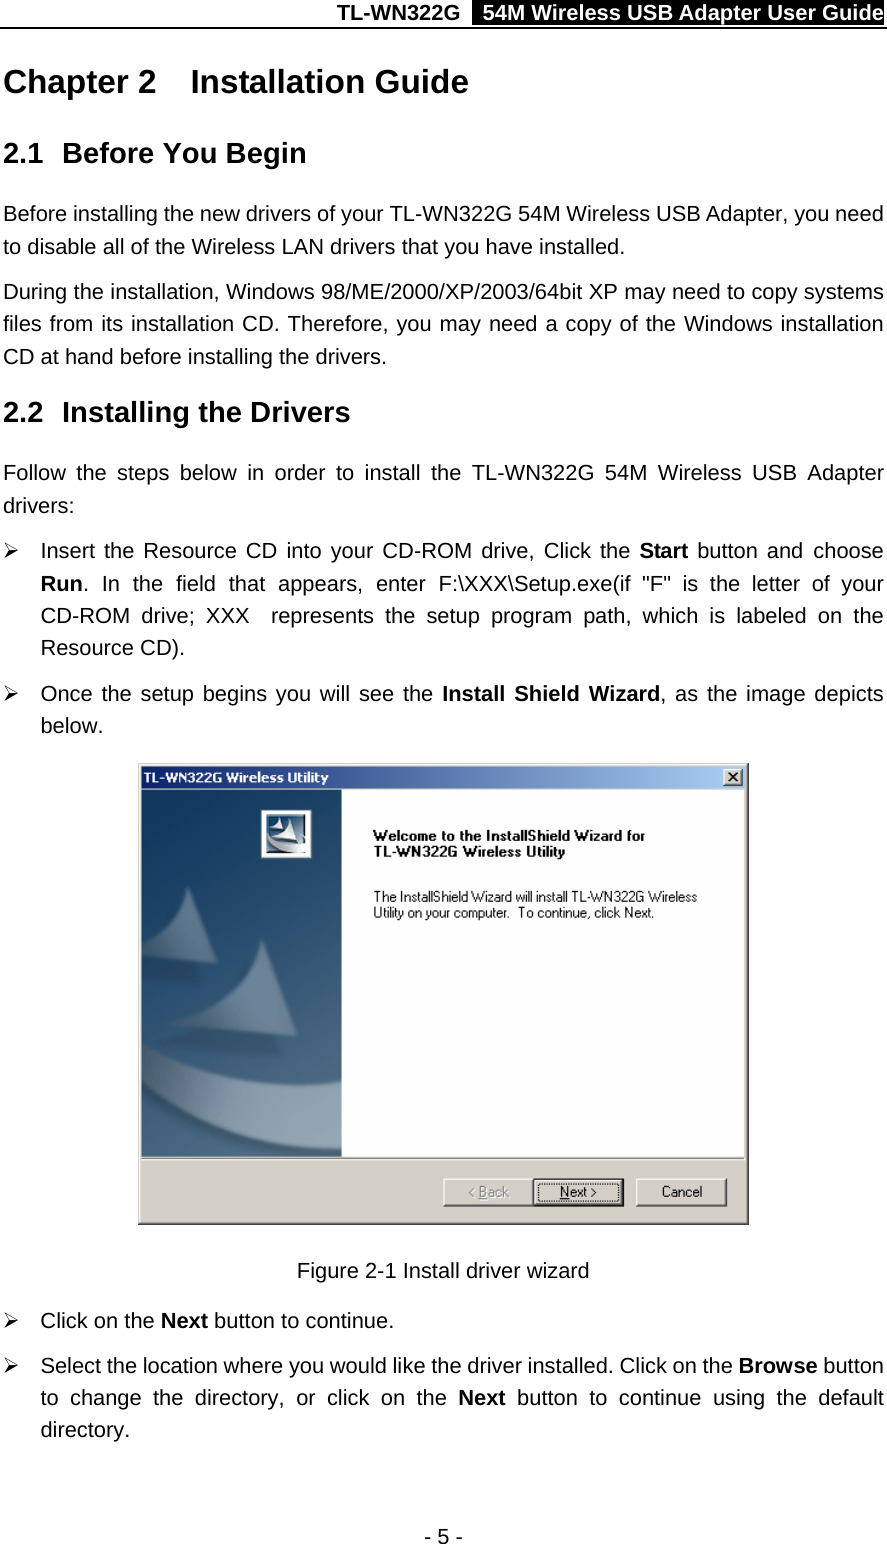 TL-WN322G    54M Wireless USB Adapter User Guide Chapter 2  Installation Guide 2.1  Before You Begin Before installing the new drivers of your TL-WN322G 54M Wireless USB Adapter, you need to disable all of the Wireless LAN drivers that you have installed. During the installation, Windows 98/ME/2000/XP/2003/64bit XP may need to copy systems files from its installation CD. Therefore, you may need a copy of the Windows installation CD at hand before installing the drivers.   2.2  Installing the Drivers Follow the steps below in order to install the TL-WN322G 54M Wireless USB Adapter drivers: ¾  Insert the Resource CD into your CD-ROM drive, Click the Start button and choose Run. In the field that appears, enter F:\XXX\Setup.exe(if &quot;F&quot; is the letter of your CD-ROM drive; XXX  represents the setup program path, which is labeled on the Resource CD). ¾  Once the setup begins you will see the Install Shield Wizard, as the image depicts below.  Figure 2-1 Install driver wizard ¾  Click on the Next button to continue. ¾  Select the location where you would like the driver installed. Click on the Browse button to change the directory, or click on the Next  button to continue using the default directory. - 5 - 